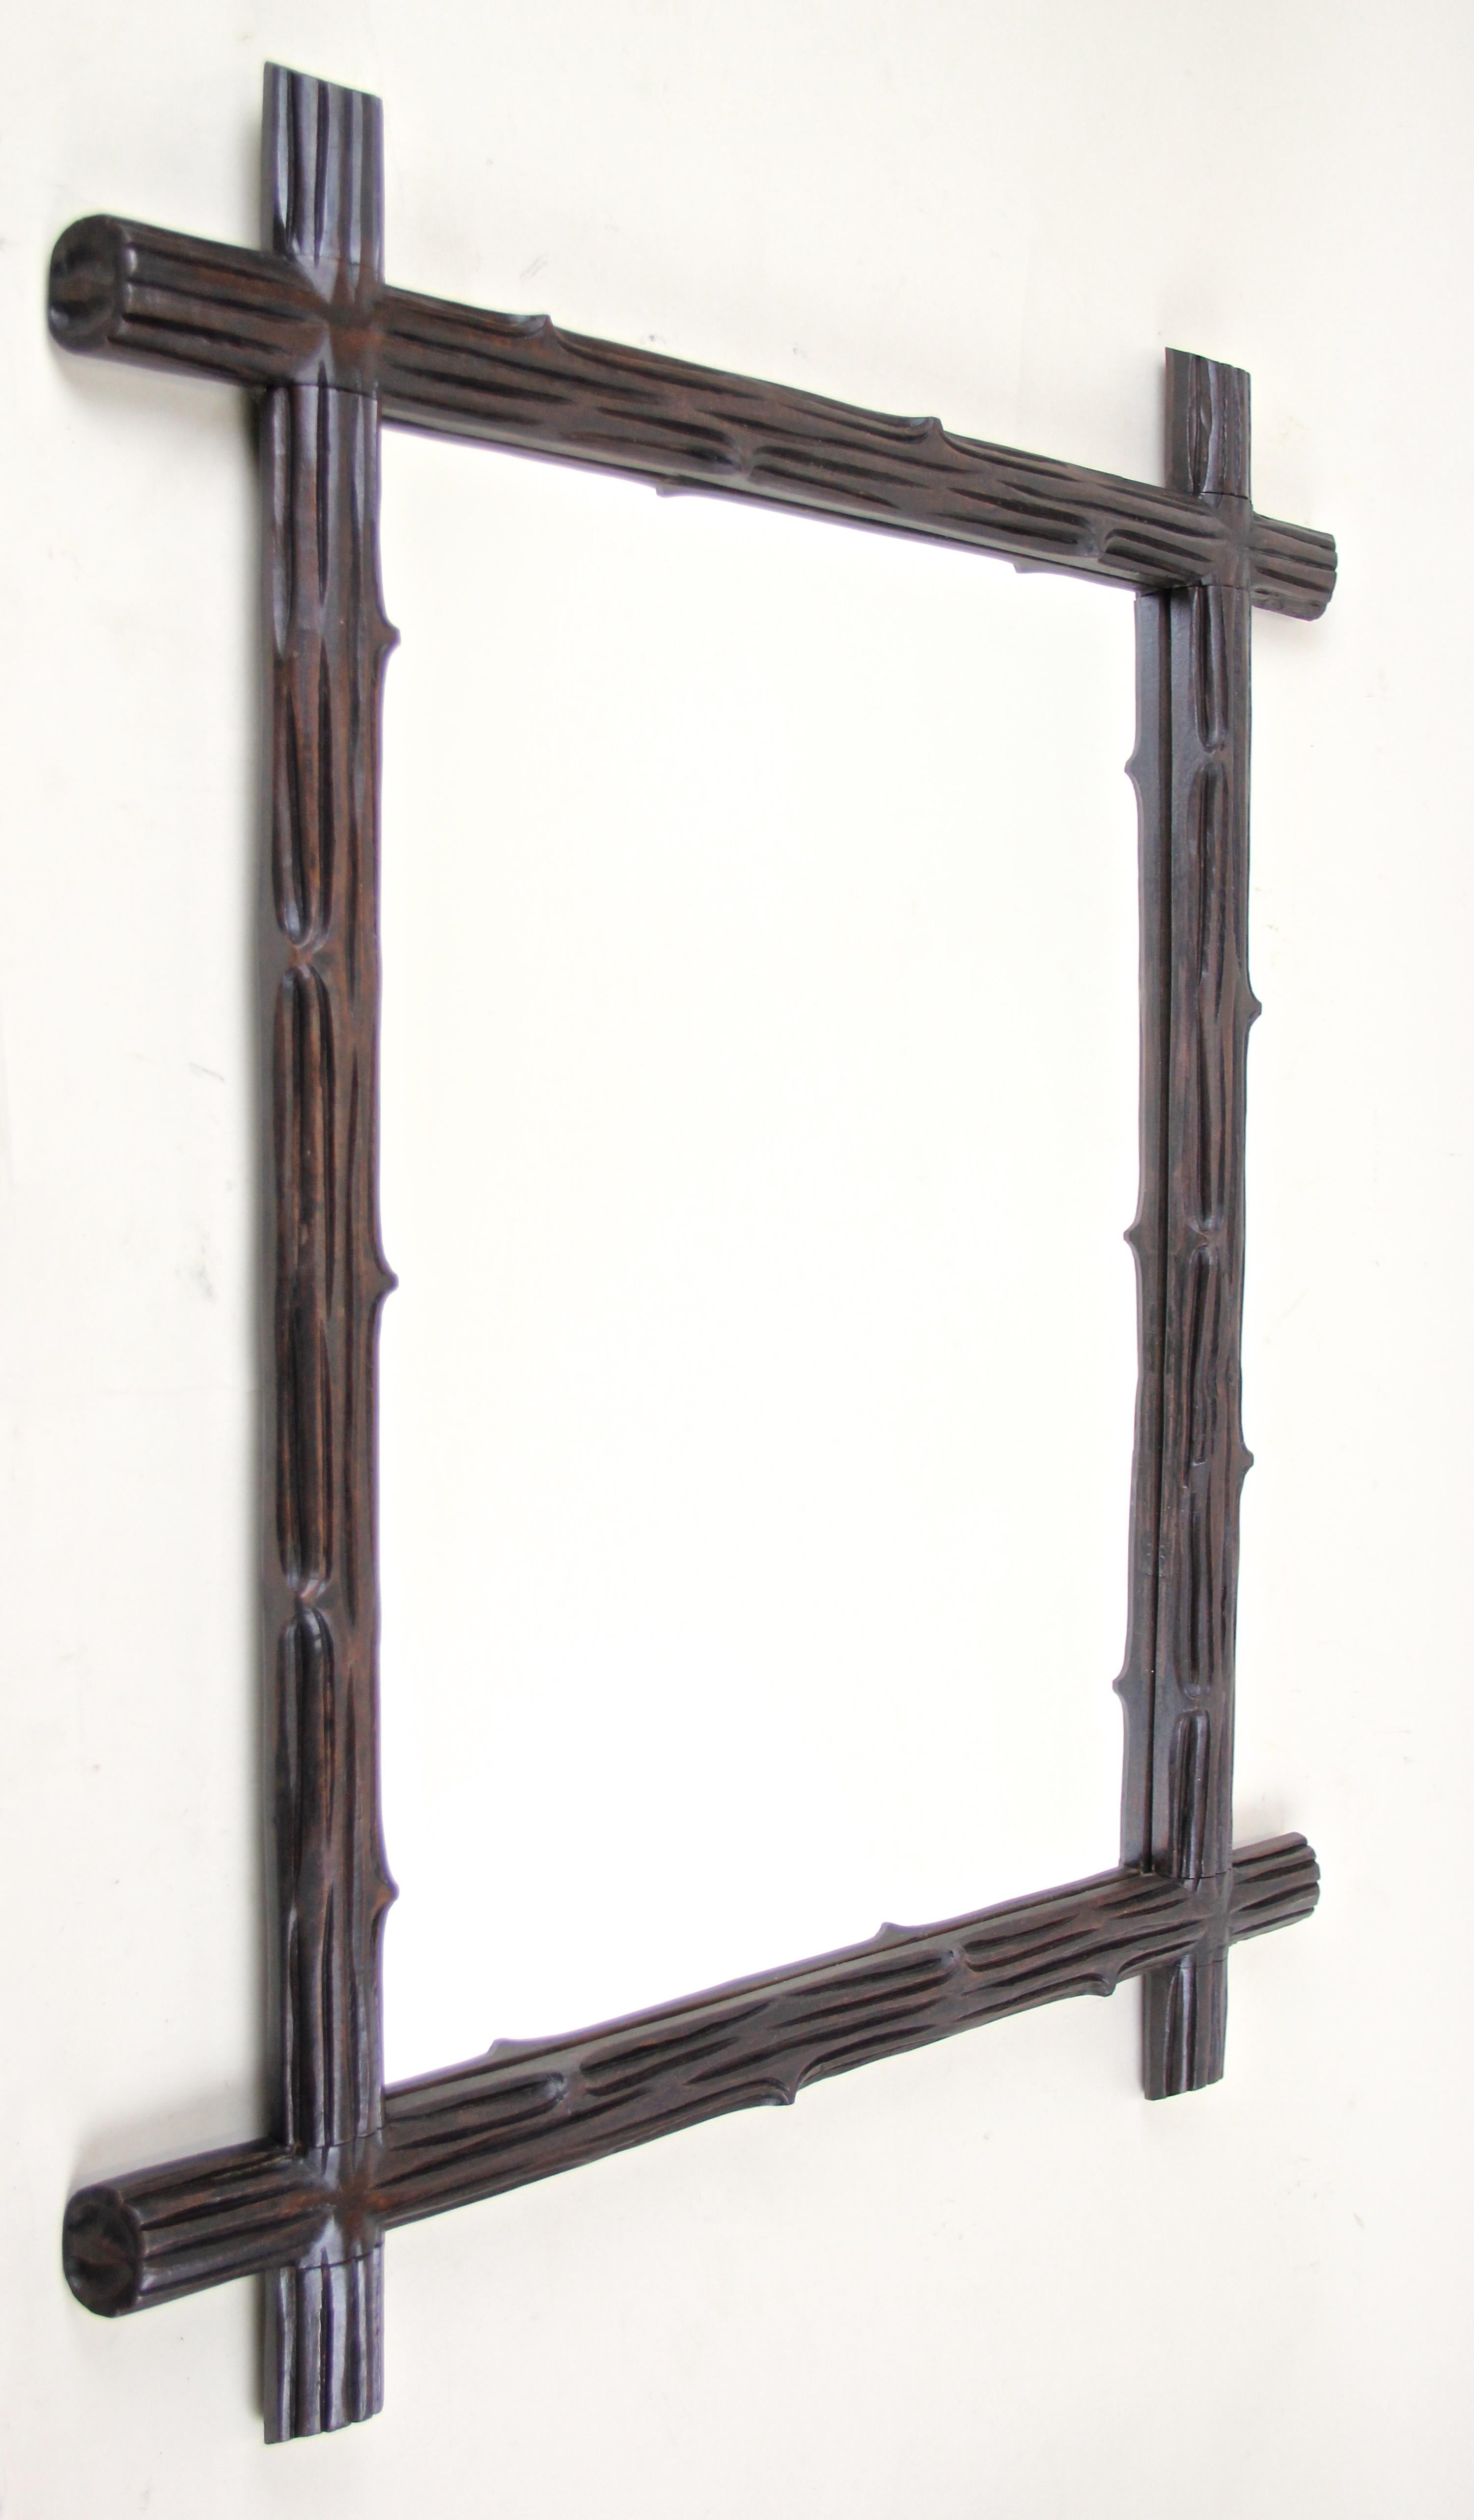 From circa 1890 in Austria comes this hand carved wooden Black Forest wall mirror. A simple but elegant 